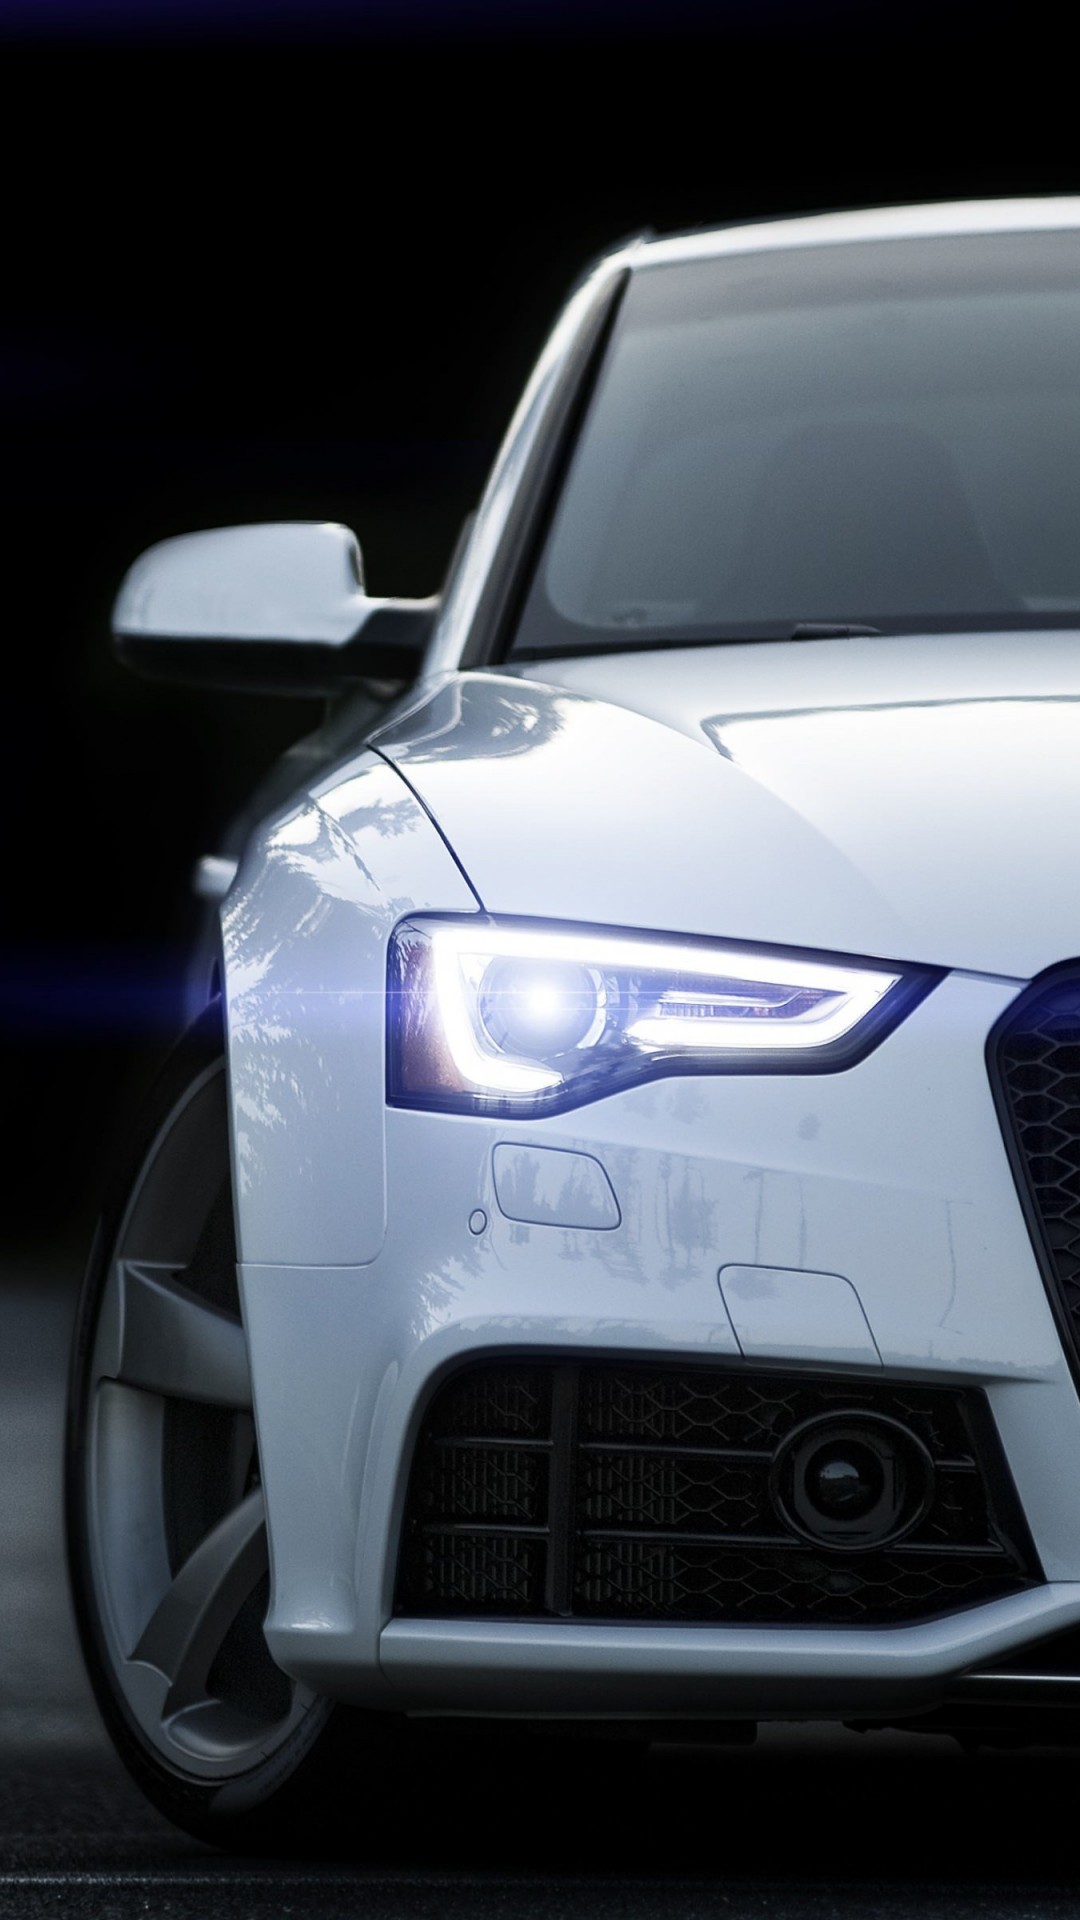 2015 Audi RS 5 Coupe Wallpaper for SONY Xperia Z2